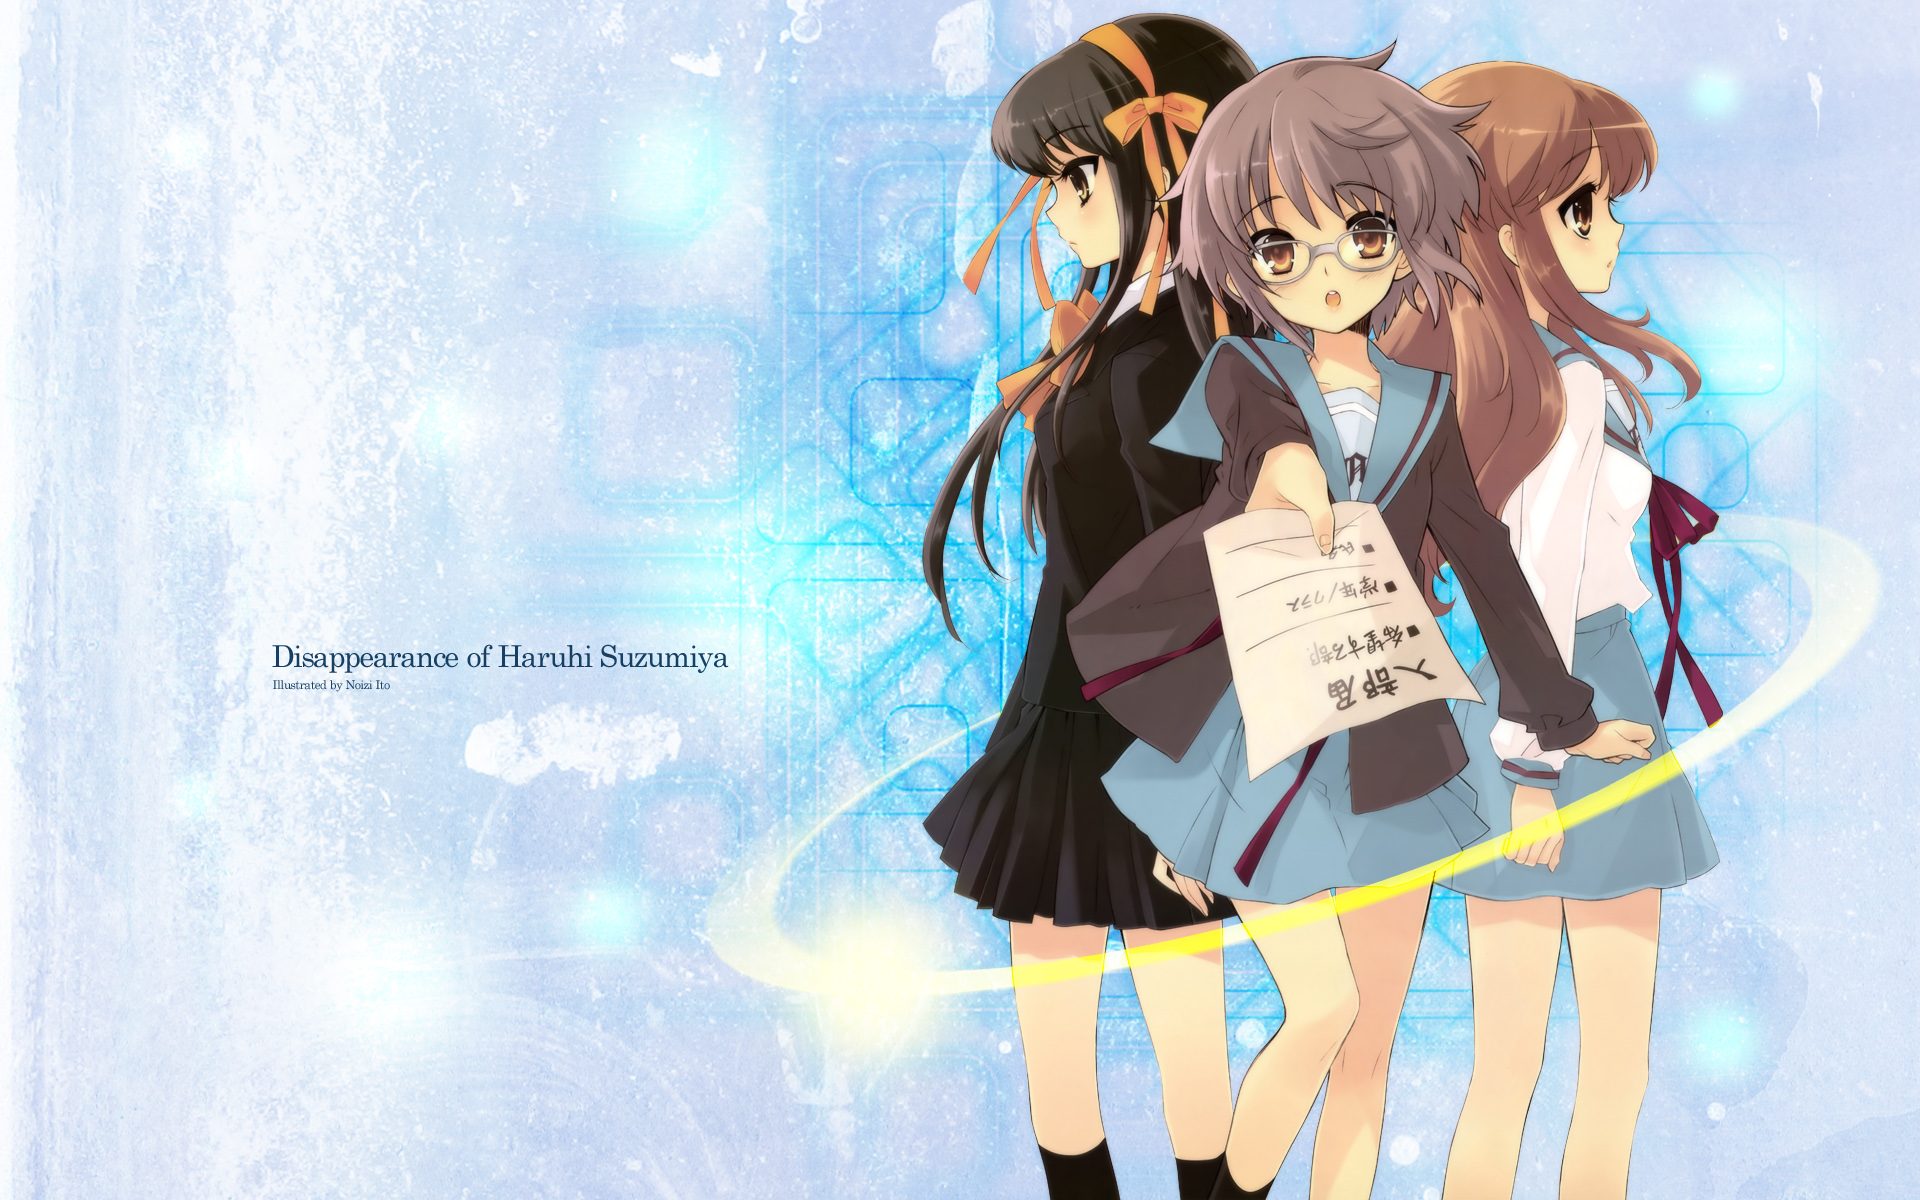 Wallpaper kiss, anime, two, a couple, date, Melancholy, Of Haruhi Suzumiya  for mobile and desktop, section прочее, resolution 1920x1080 - download